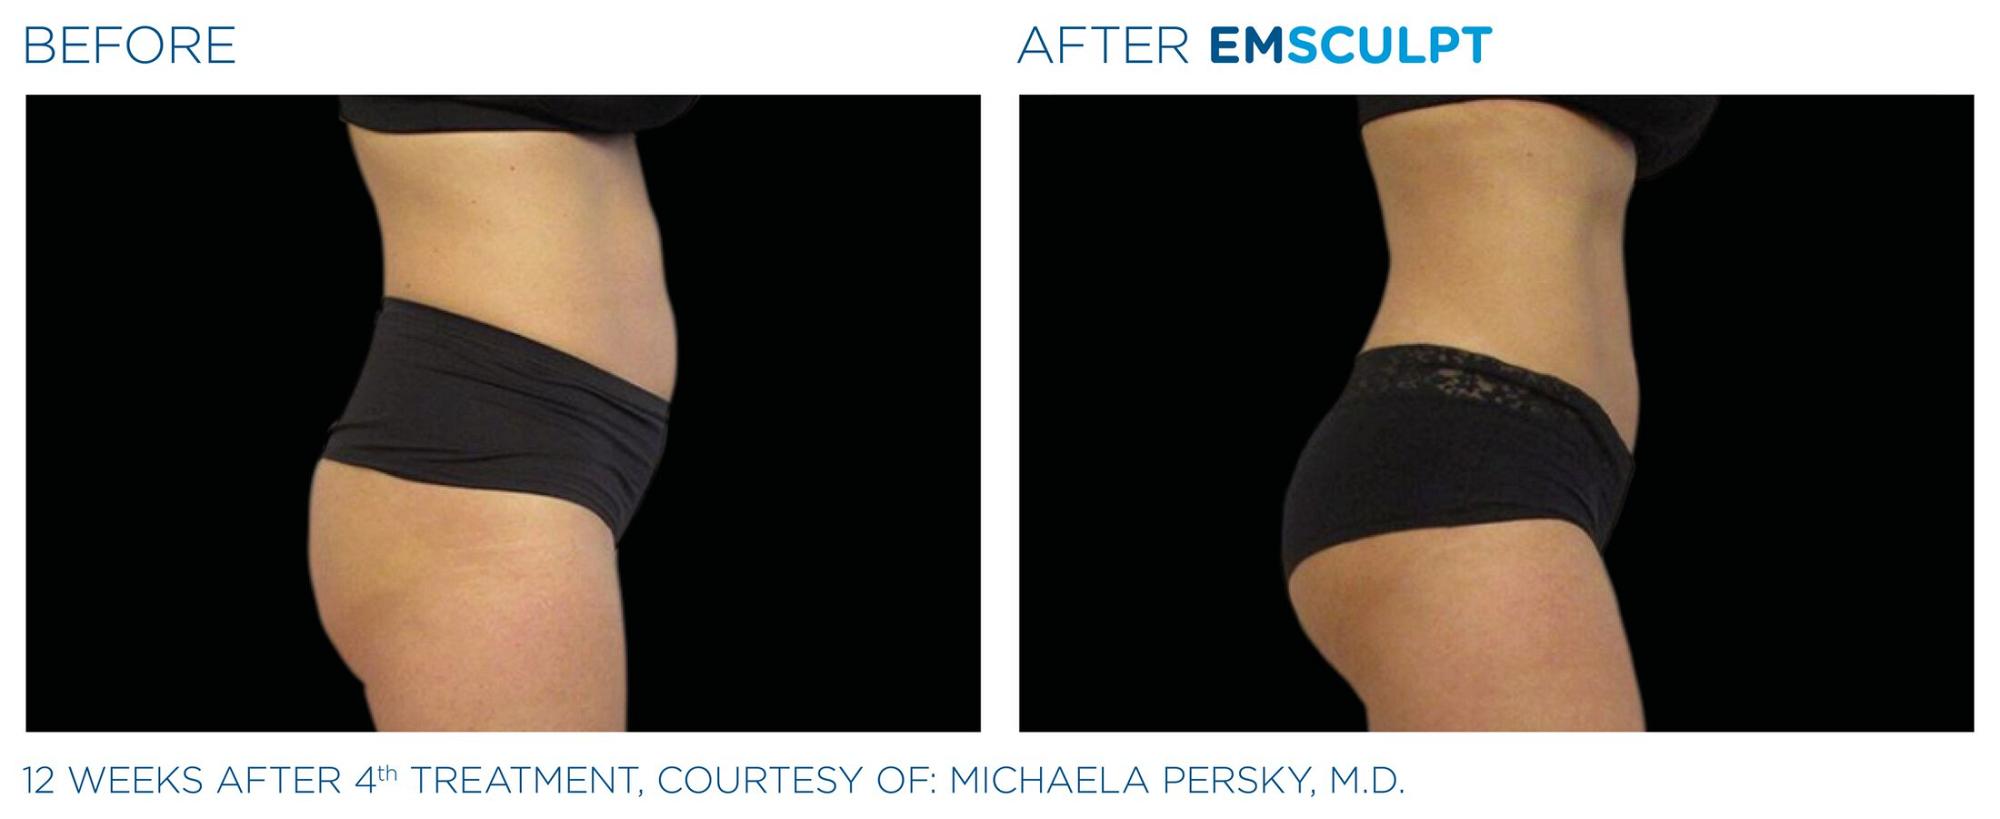 EmSculpt before and after